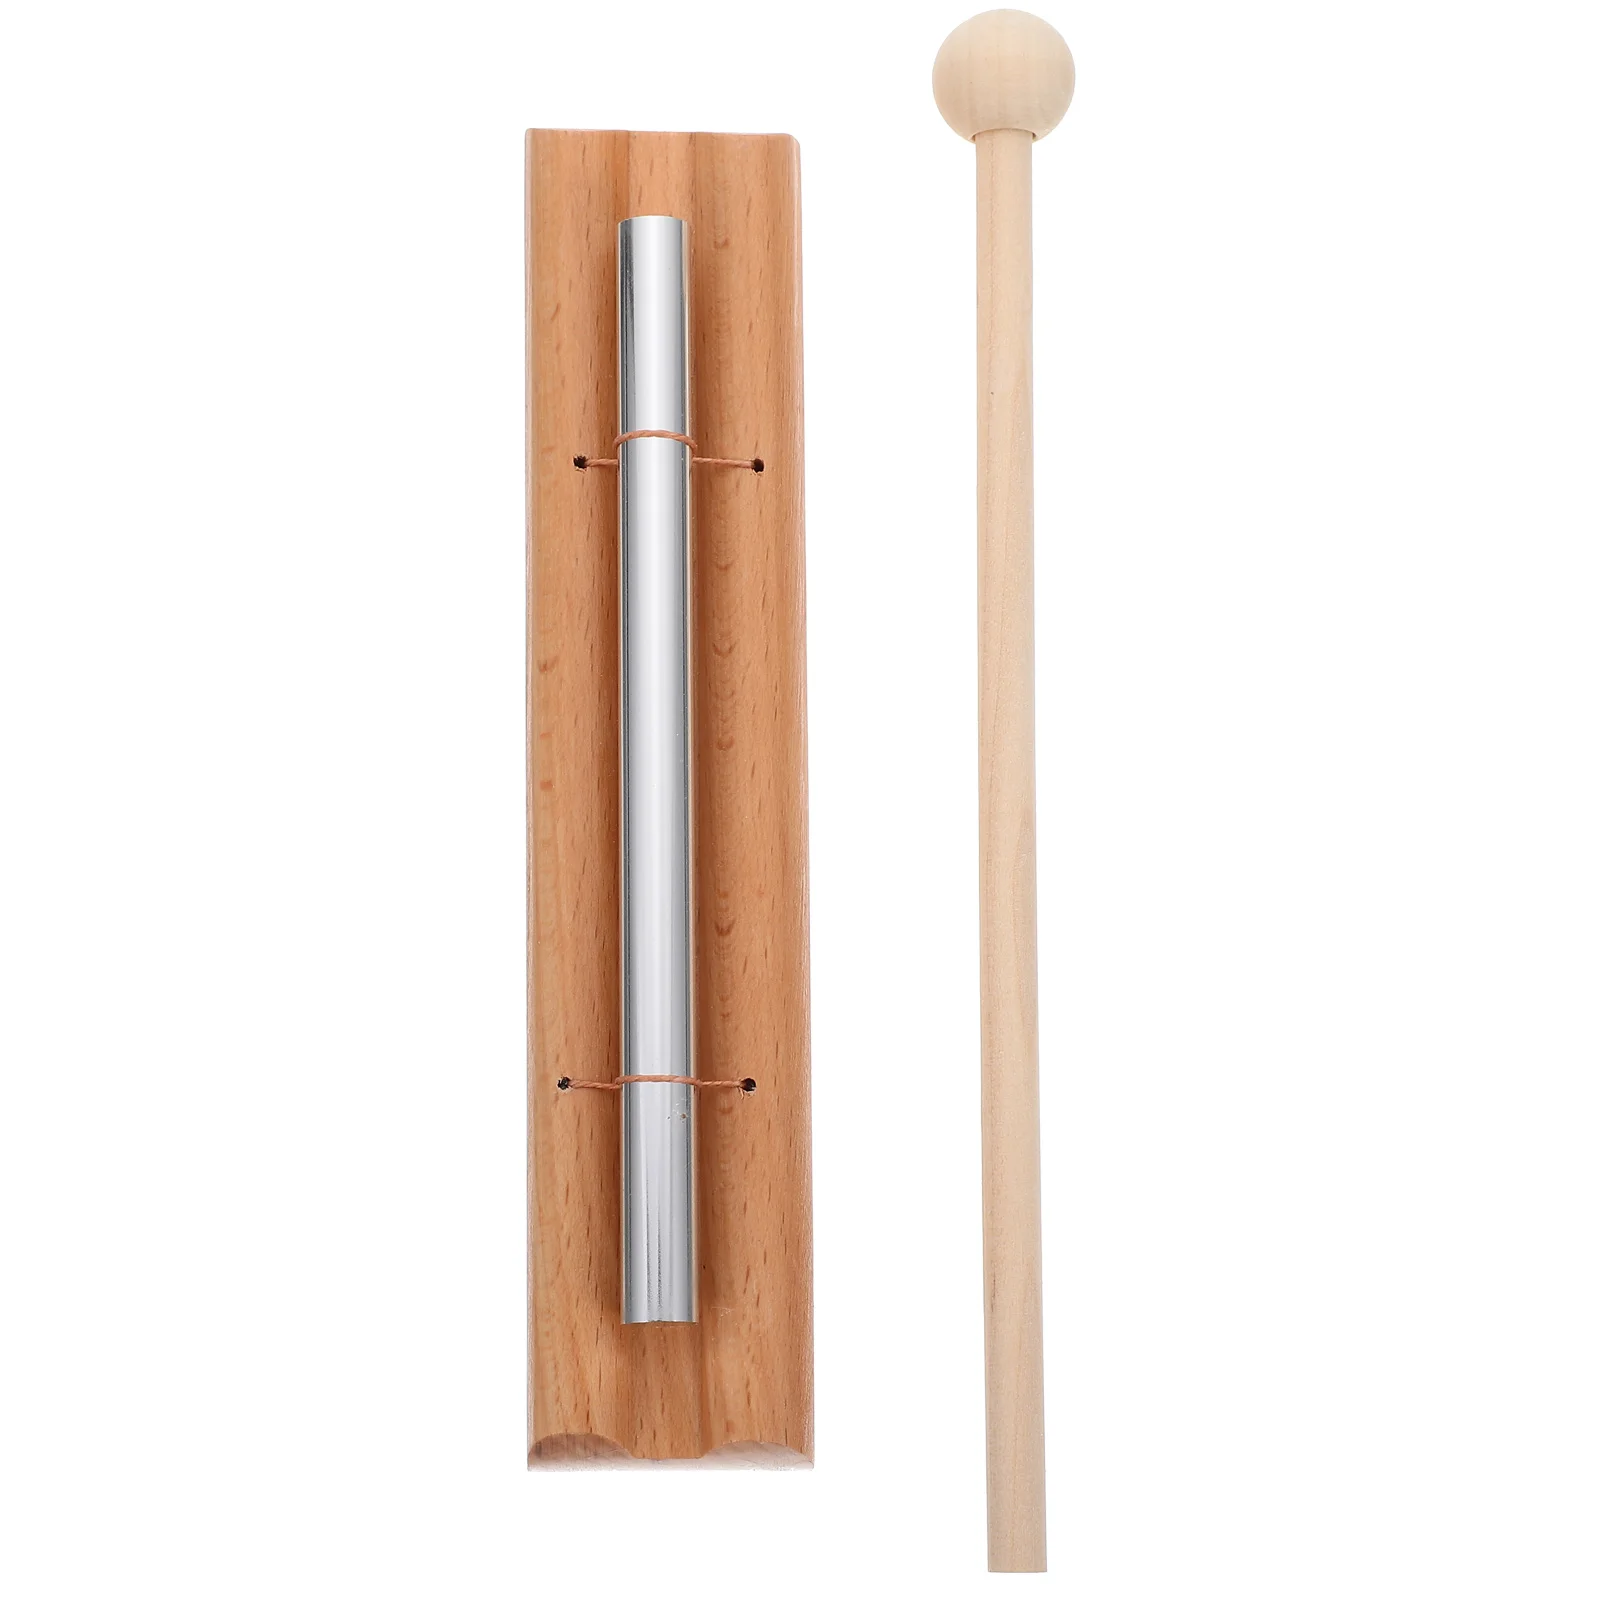 

One Phoneme Children's Orff Instruments 1-Tone Percussion Musical Hand Bell Chime Toy Kids Plaything Wooden Xylophone